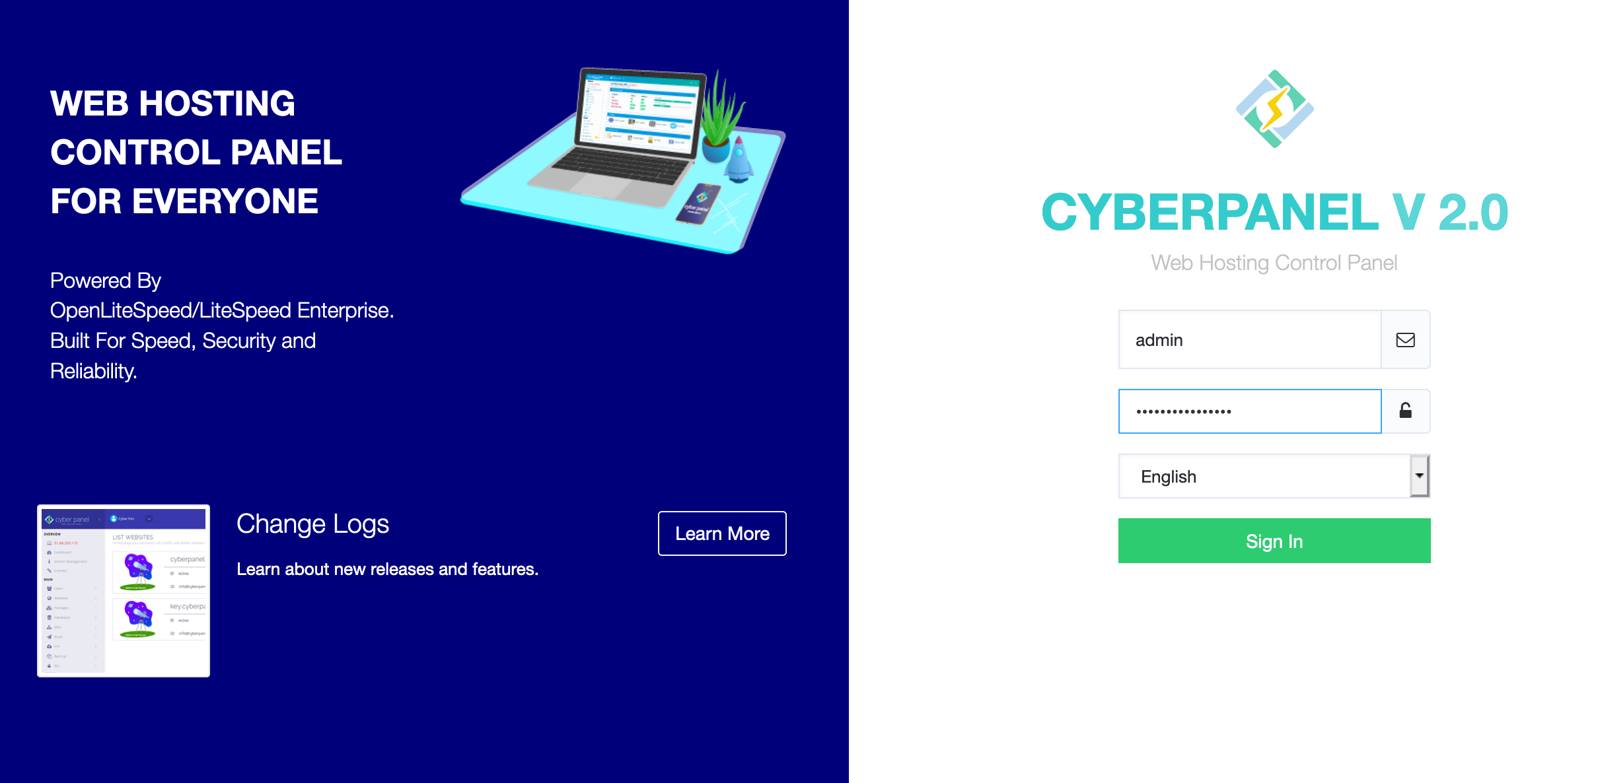 Log into your CyberPanel